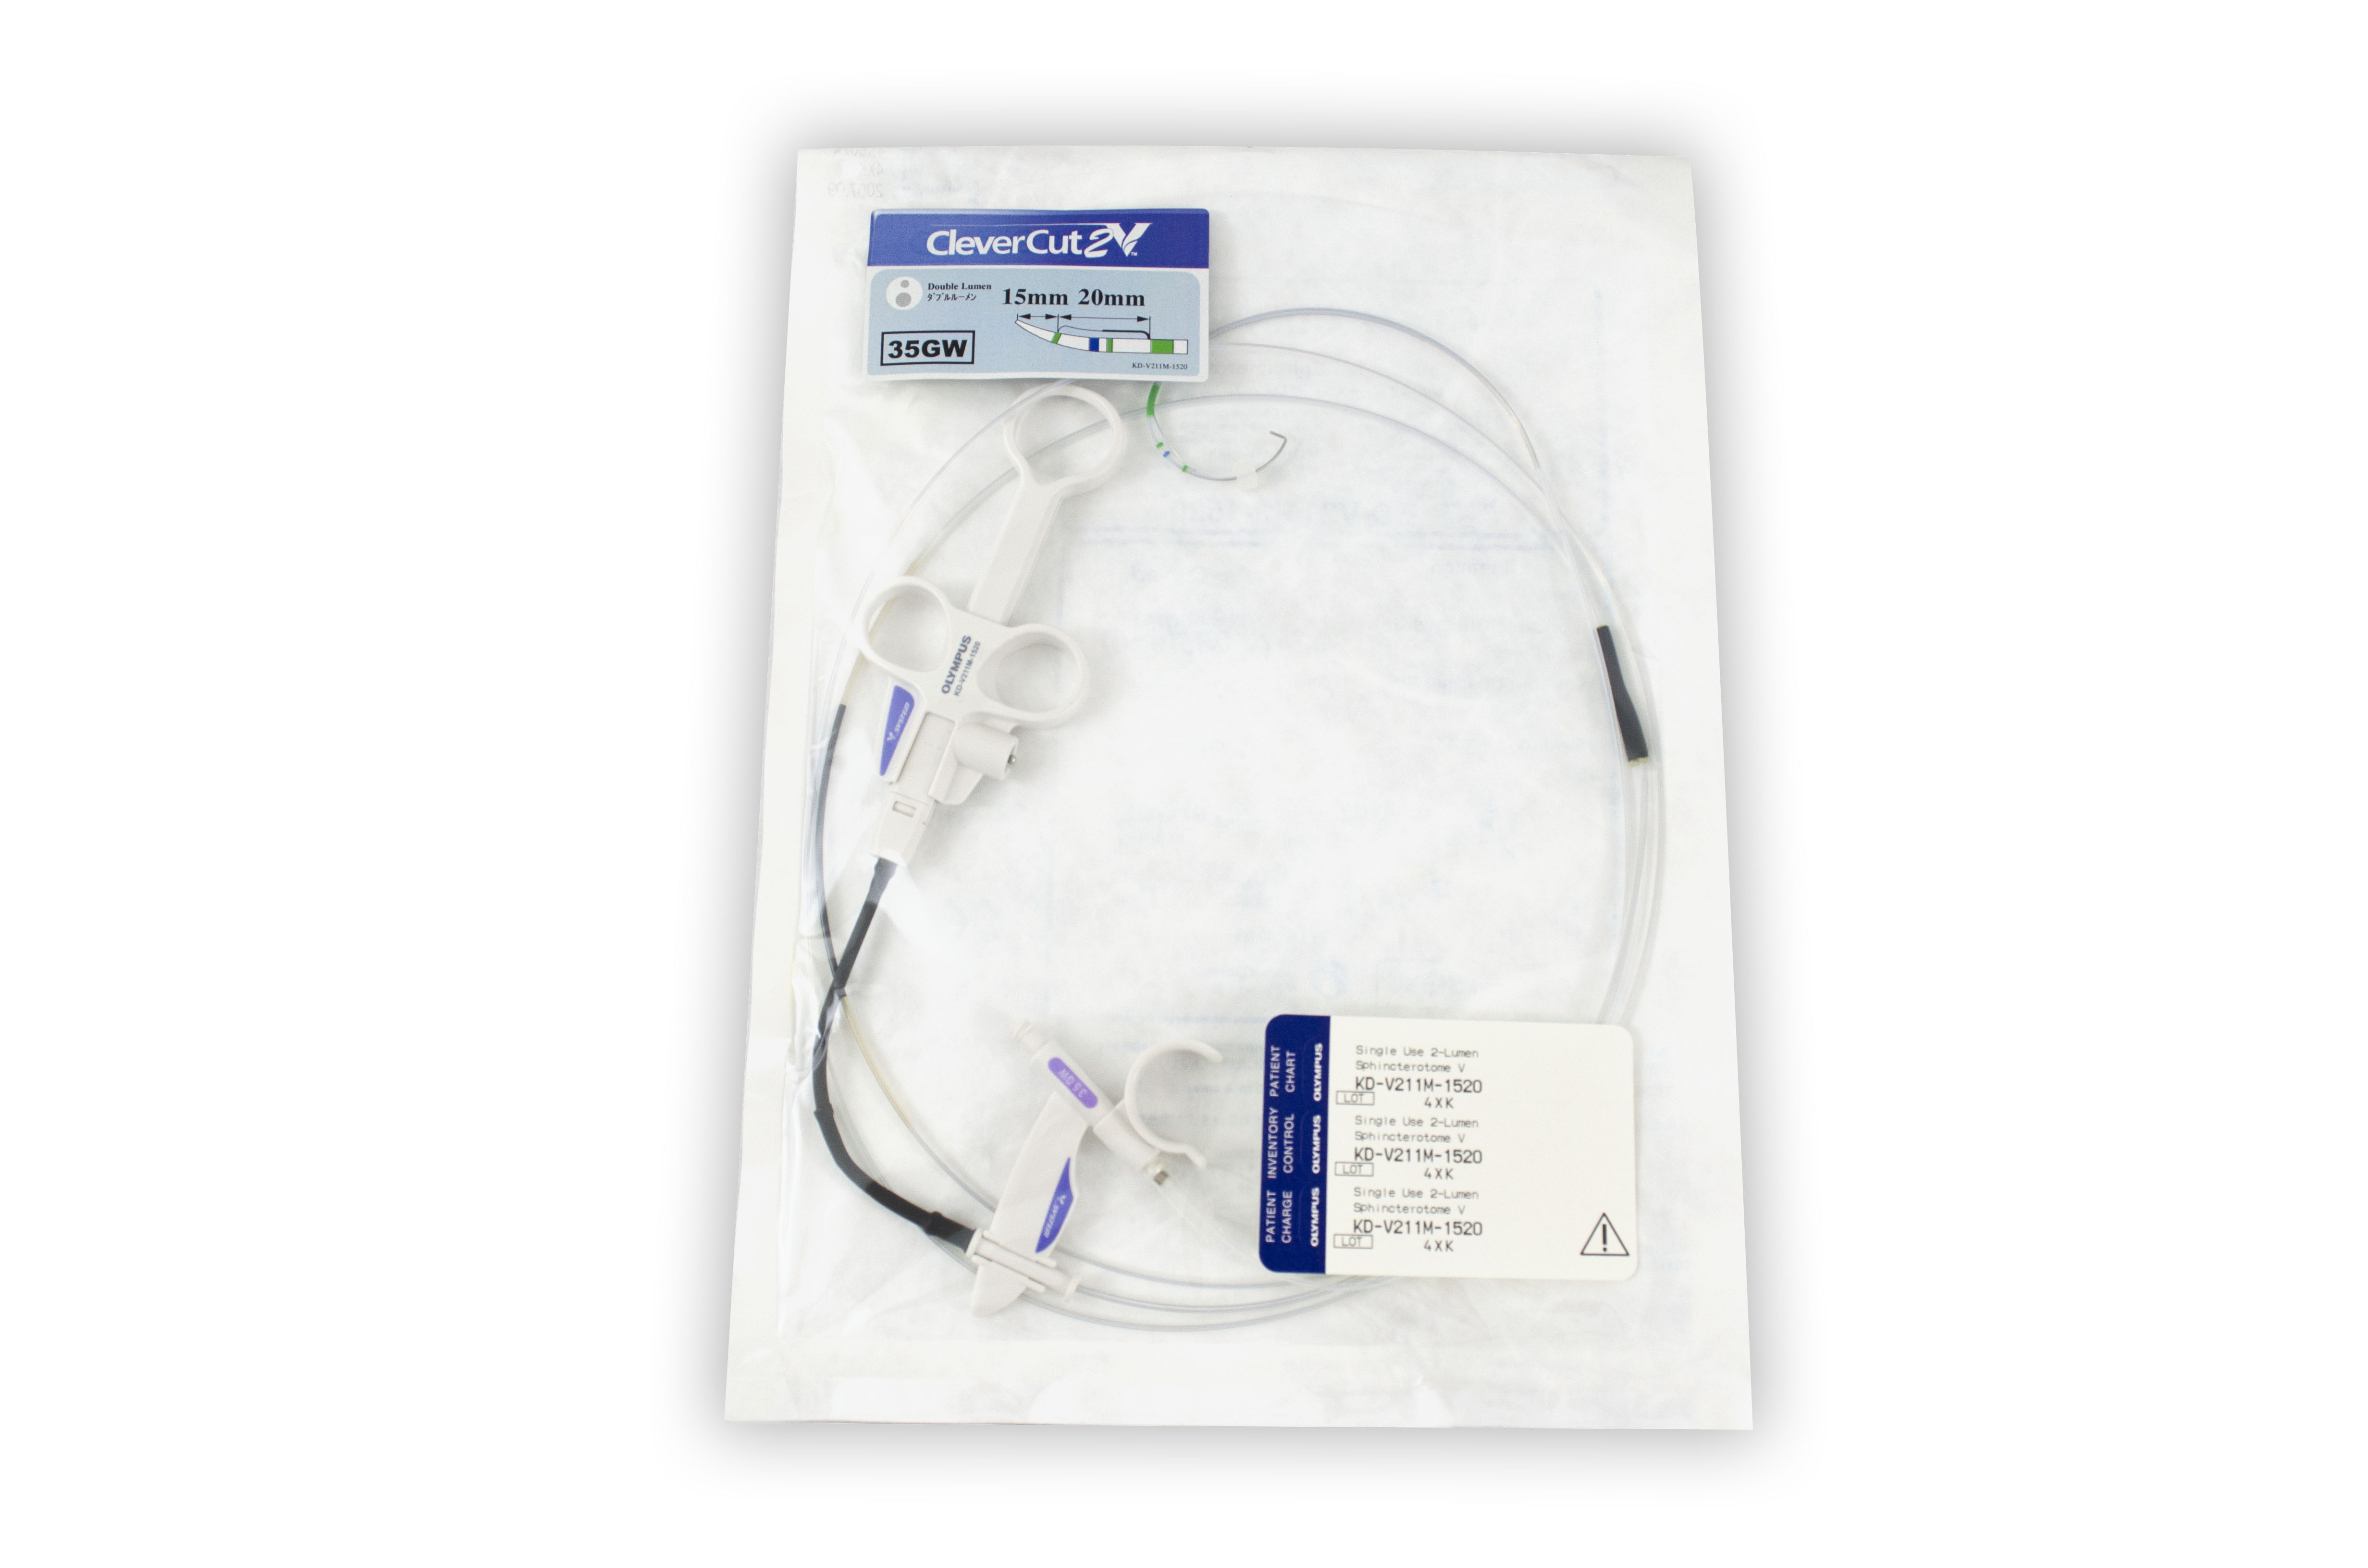 [Out-of-Date] Olympus Disposable Sphincterotome - KD-V211M-1520